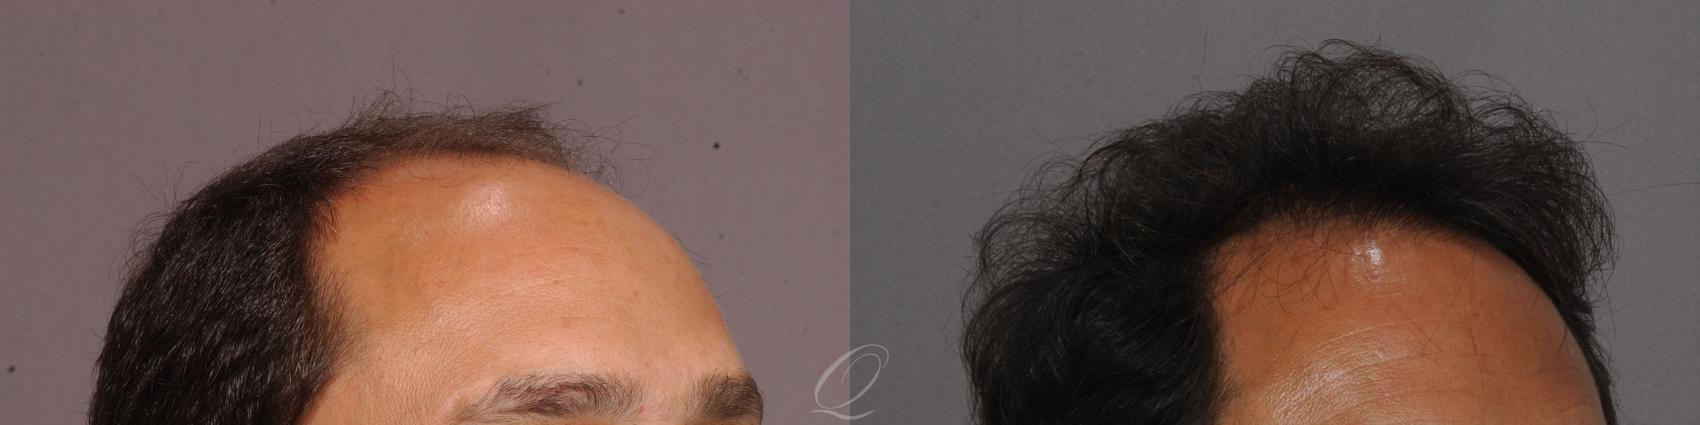 FUT Case 1045 Before & After View #3 | Rochester, NY | Quatela Center for Hair Restoration